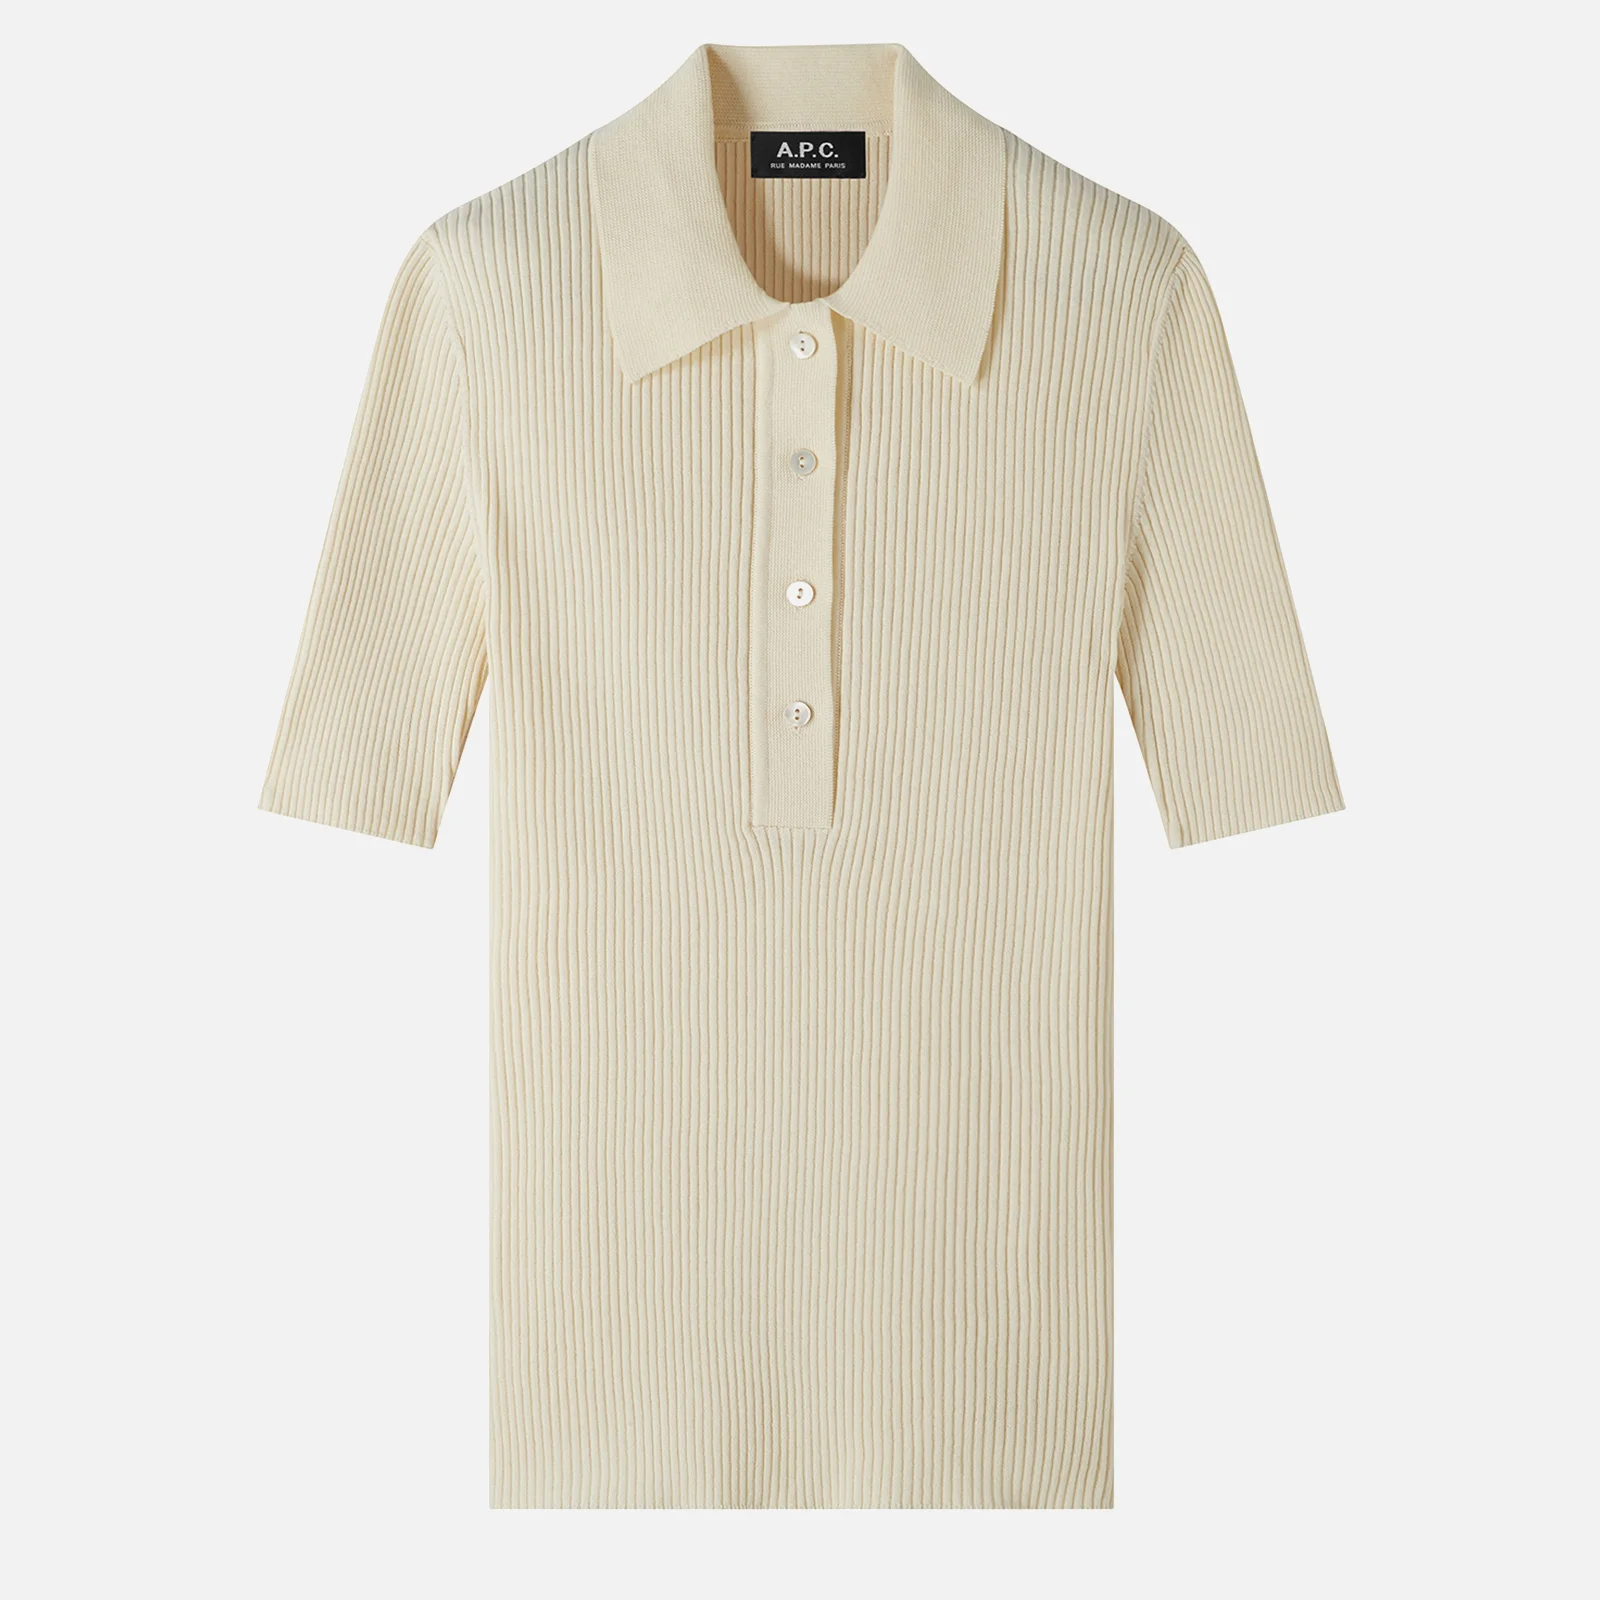 A.P.C Danae Ribbed Cotton-Jersey Polo Top Image 1